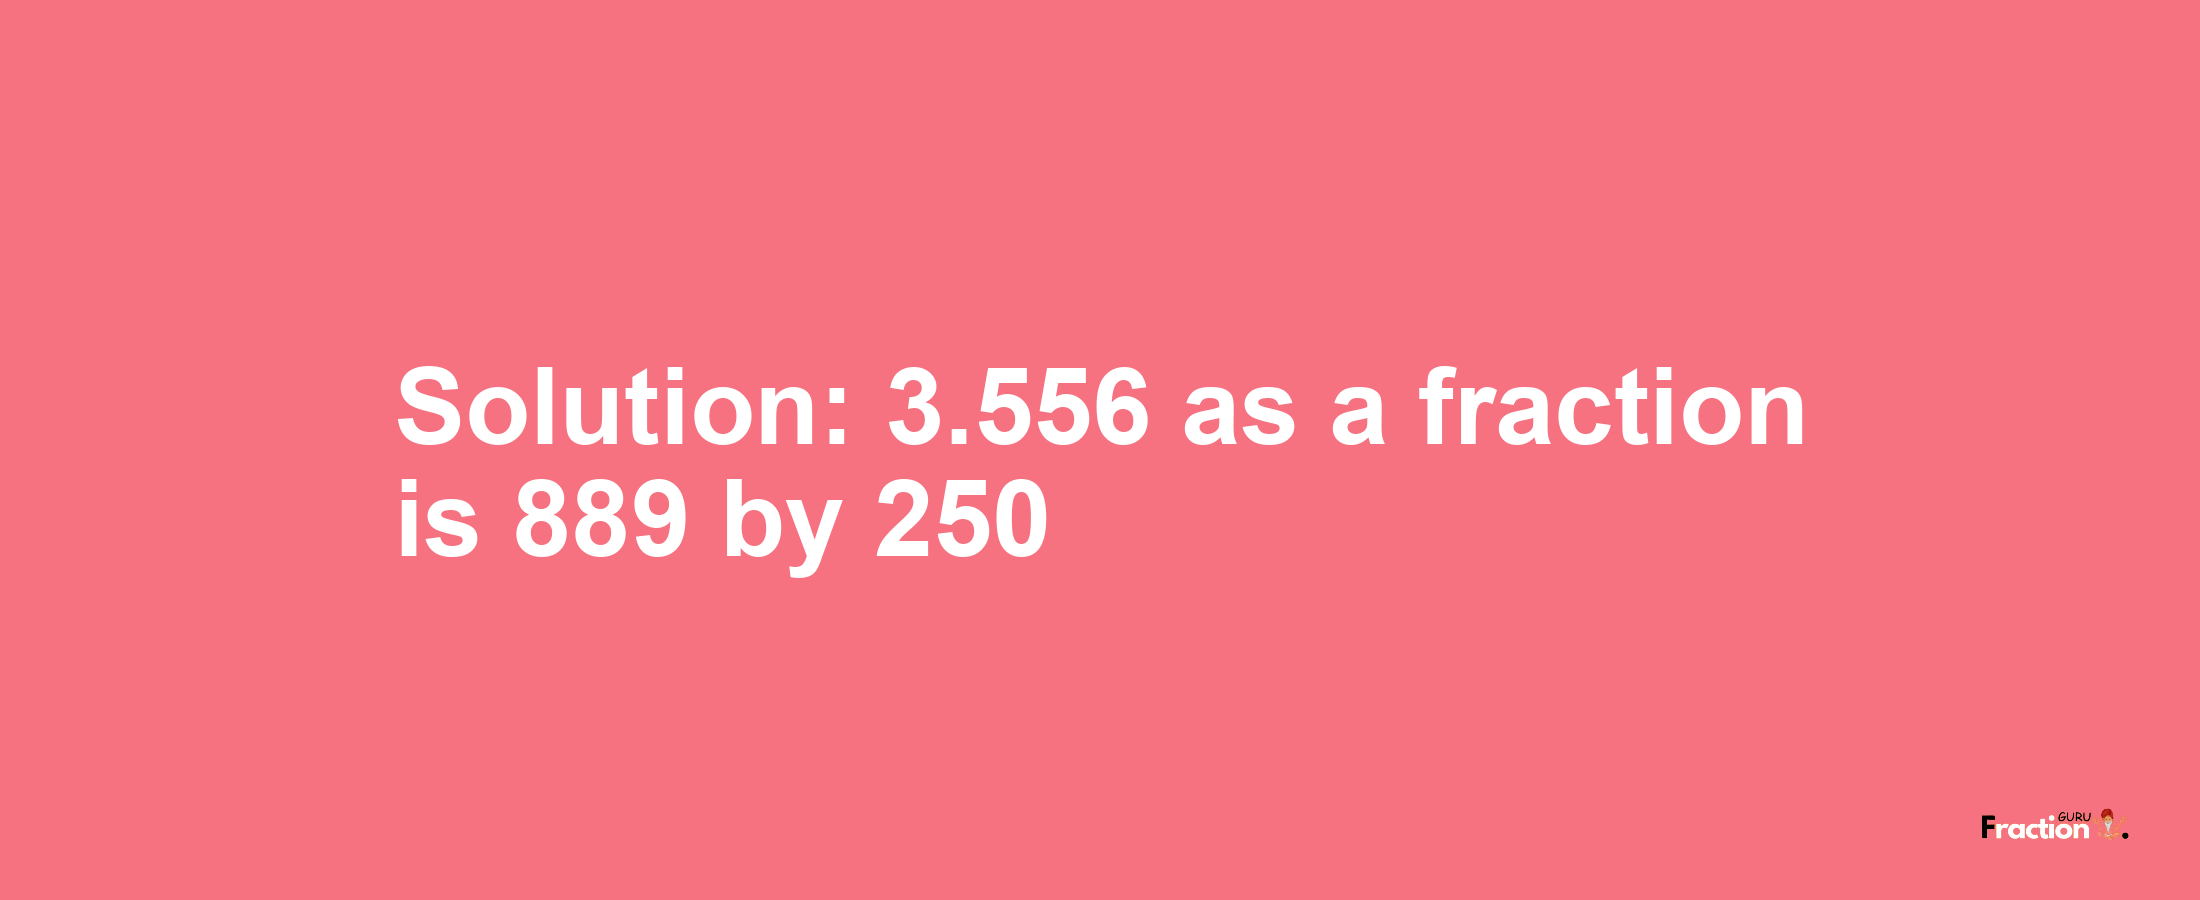 Solution:3.556 as a fraction is 889/250